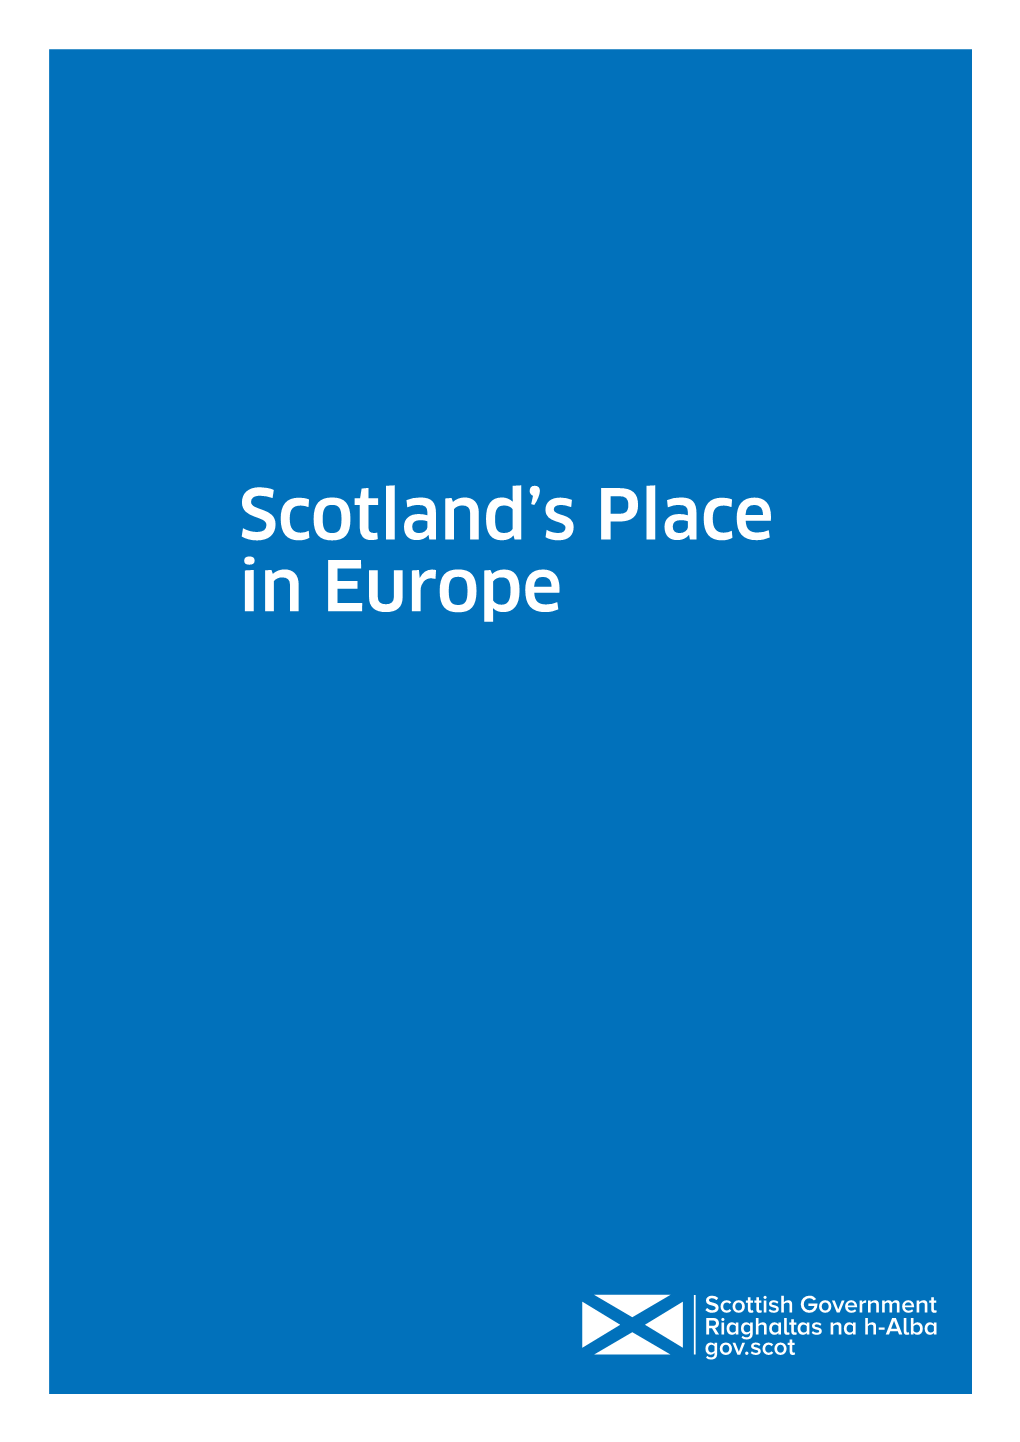 Scotland's Place in Europe